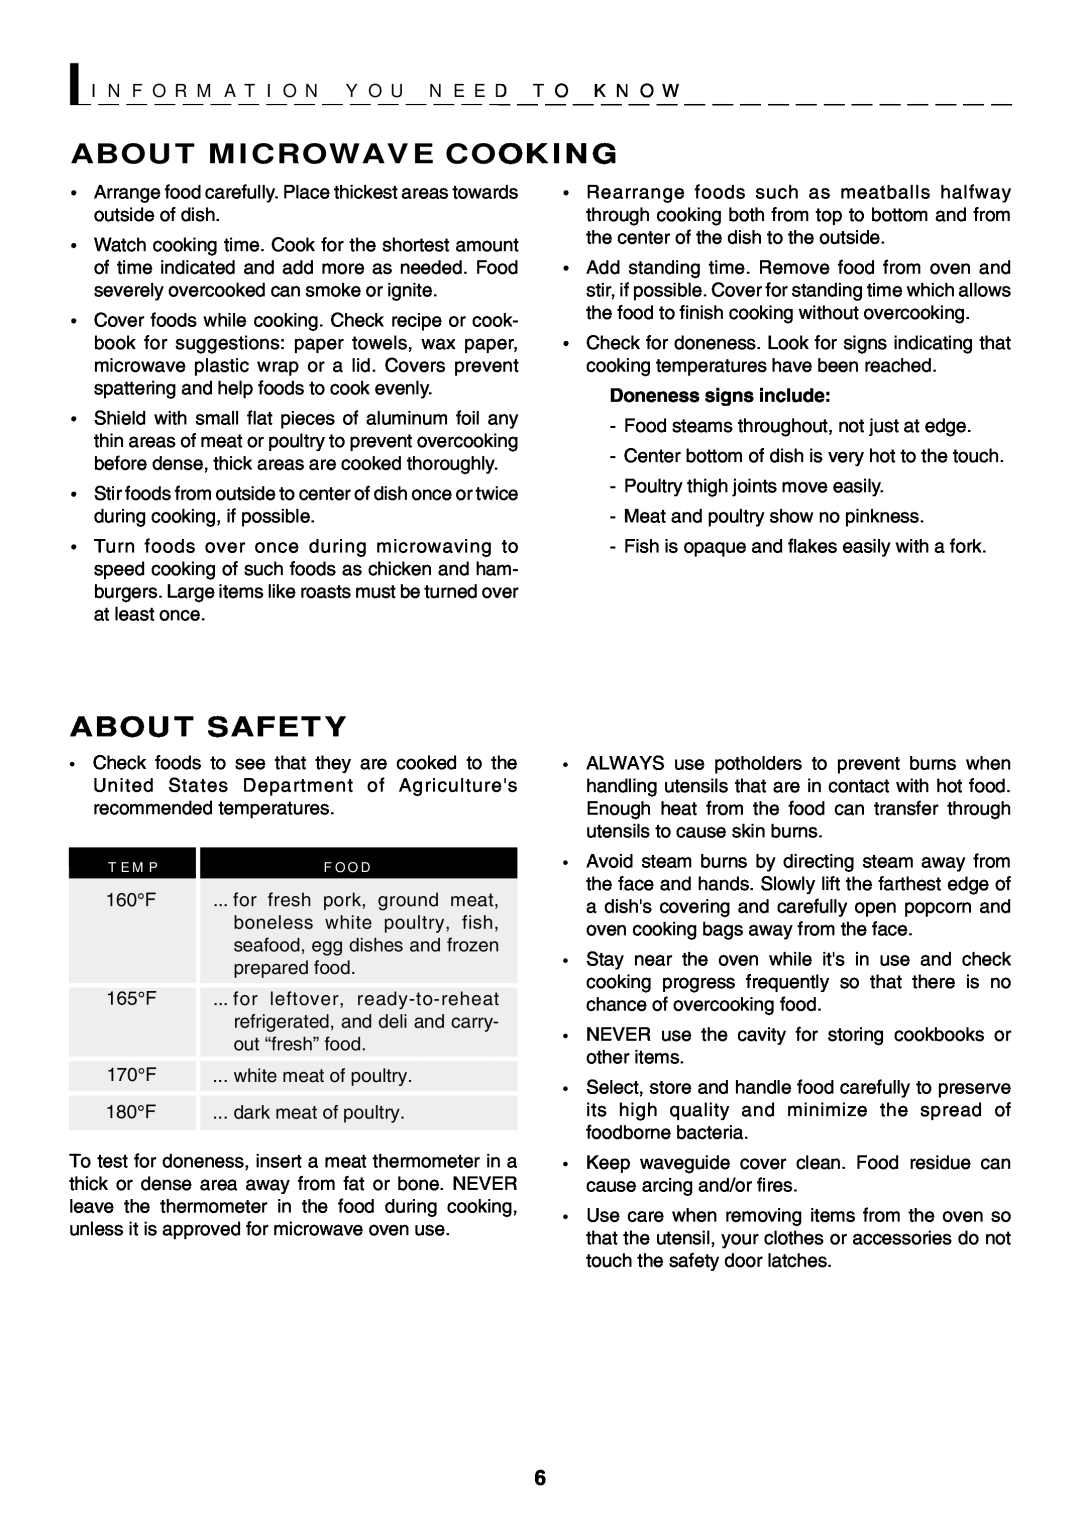 Sharp R-319F About Microwave Cooking, About Safety, I N F O R M A T I O N Y O U N E E D T O K N O W, T E M P, F O O D 